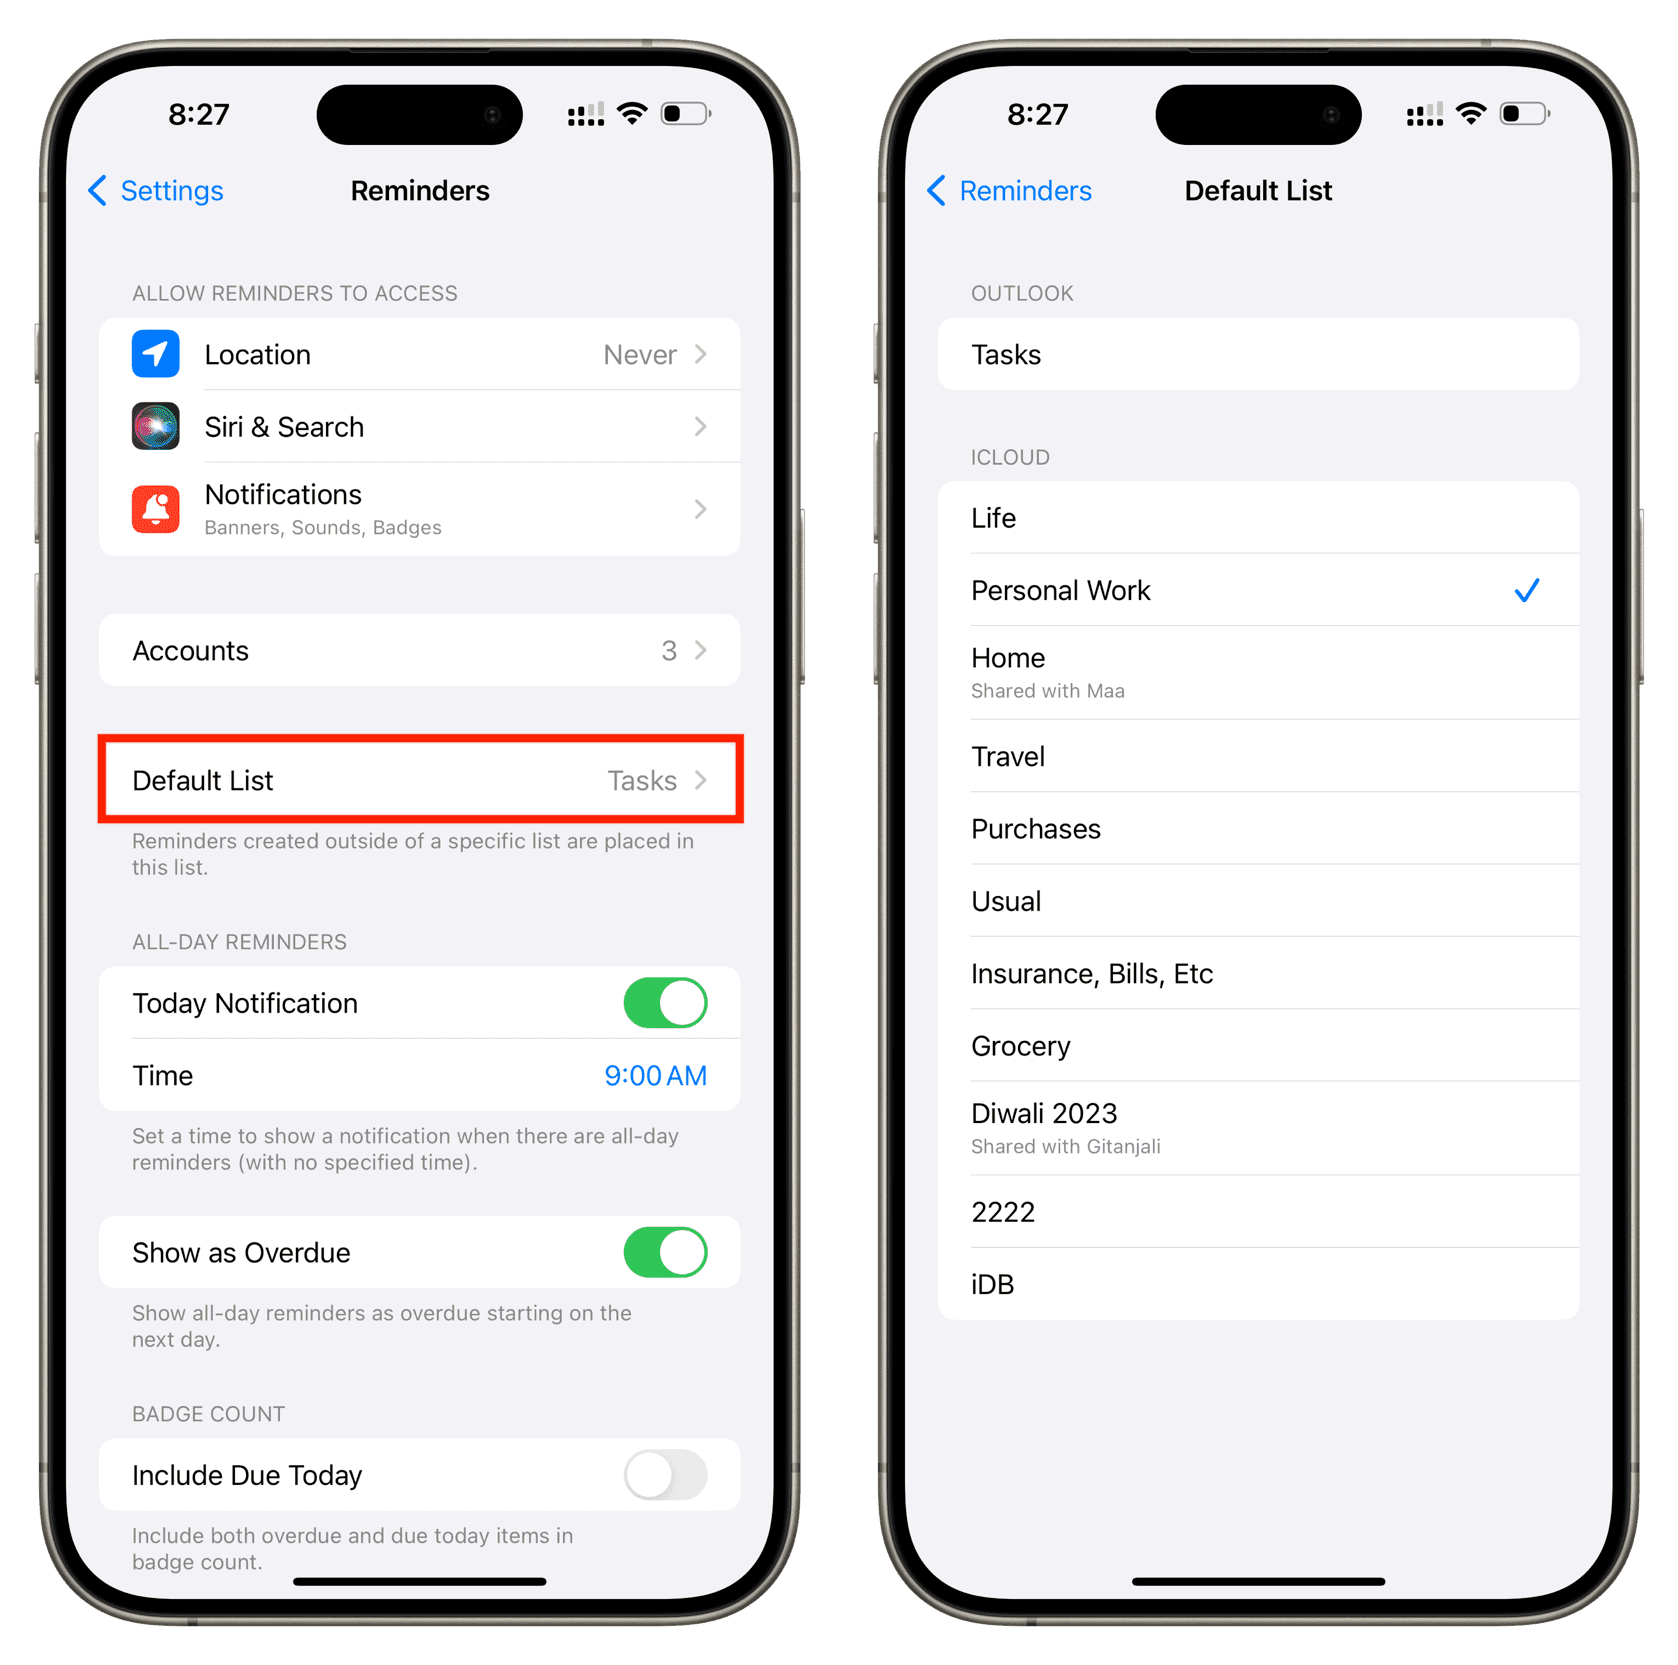 Change default reminders list to one from iCloud on iPhone